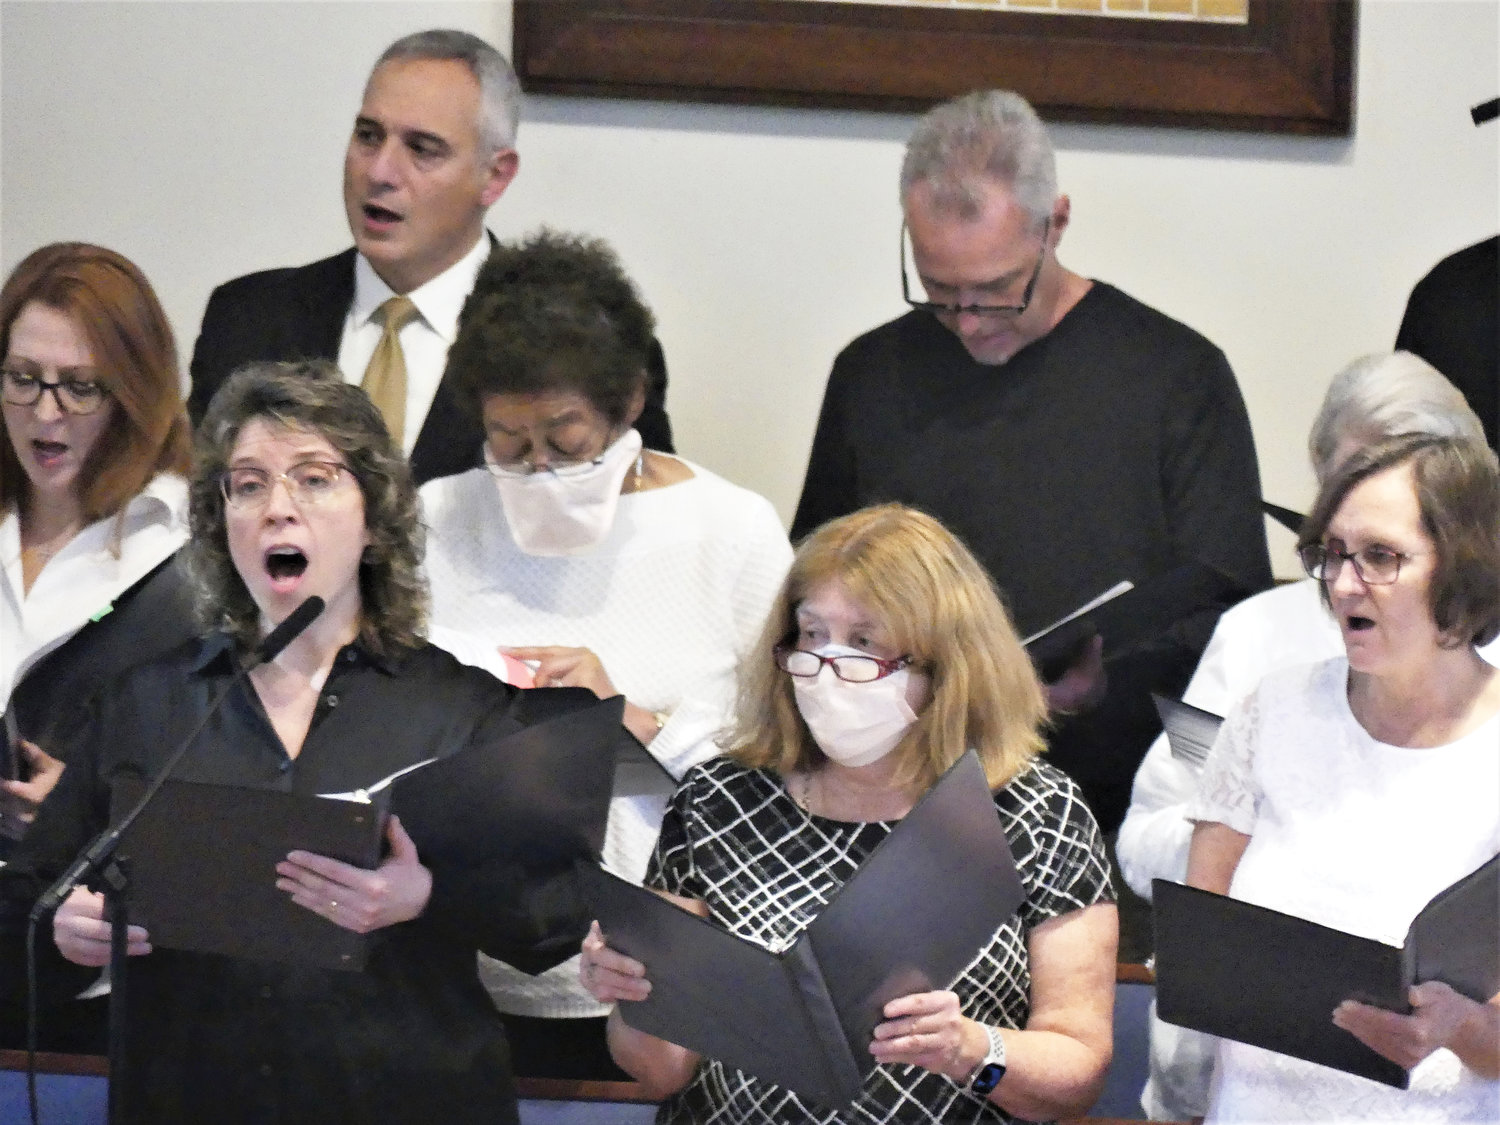 Members of the choir share their gift of song.